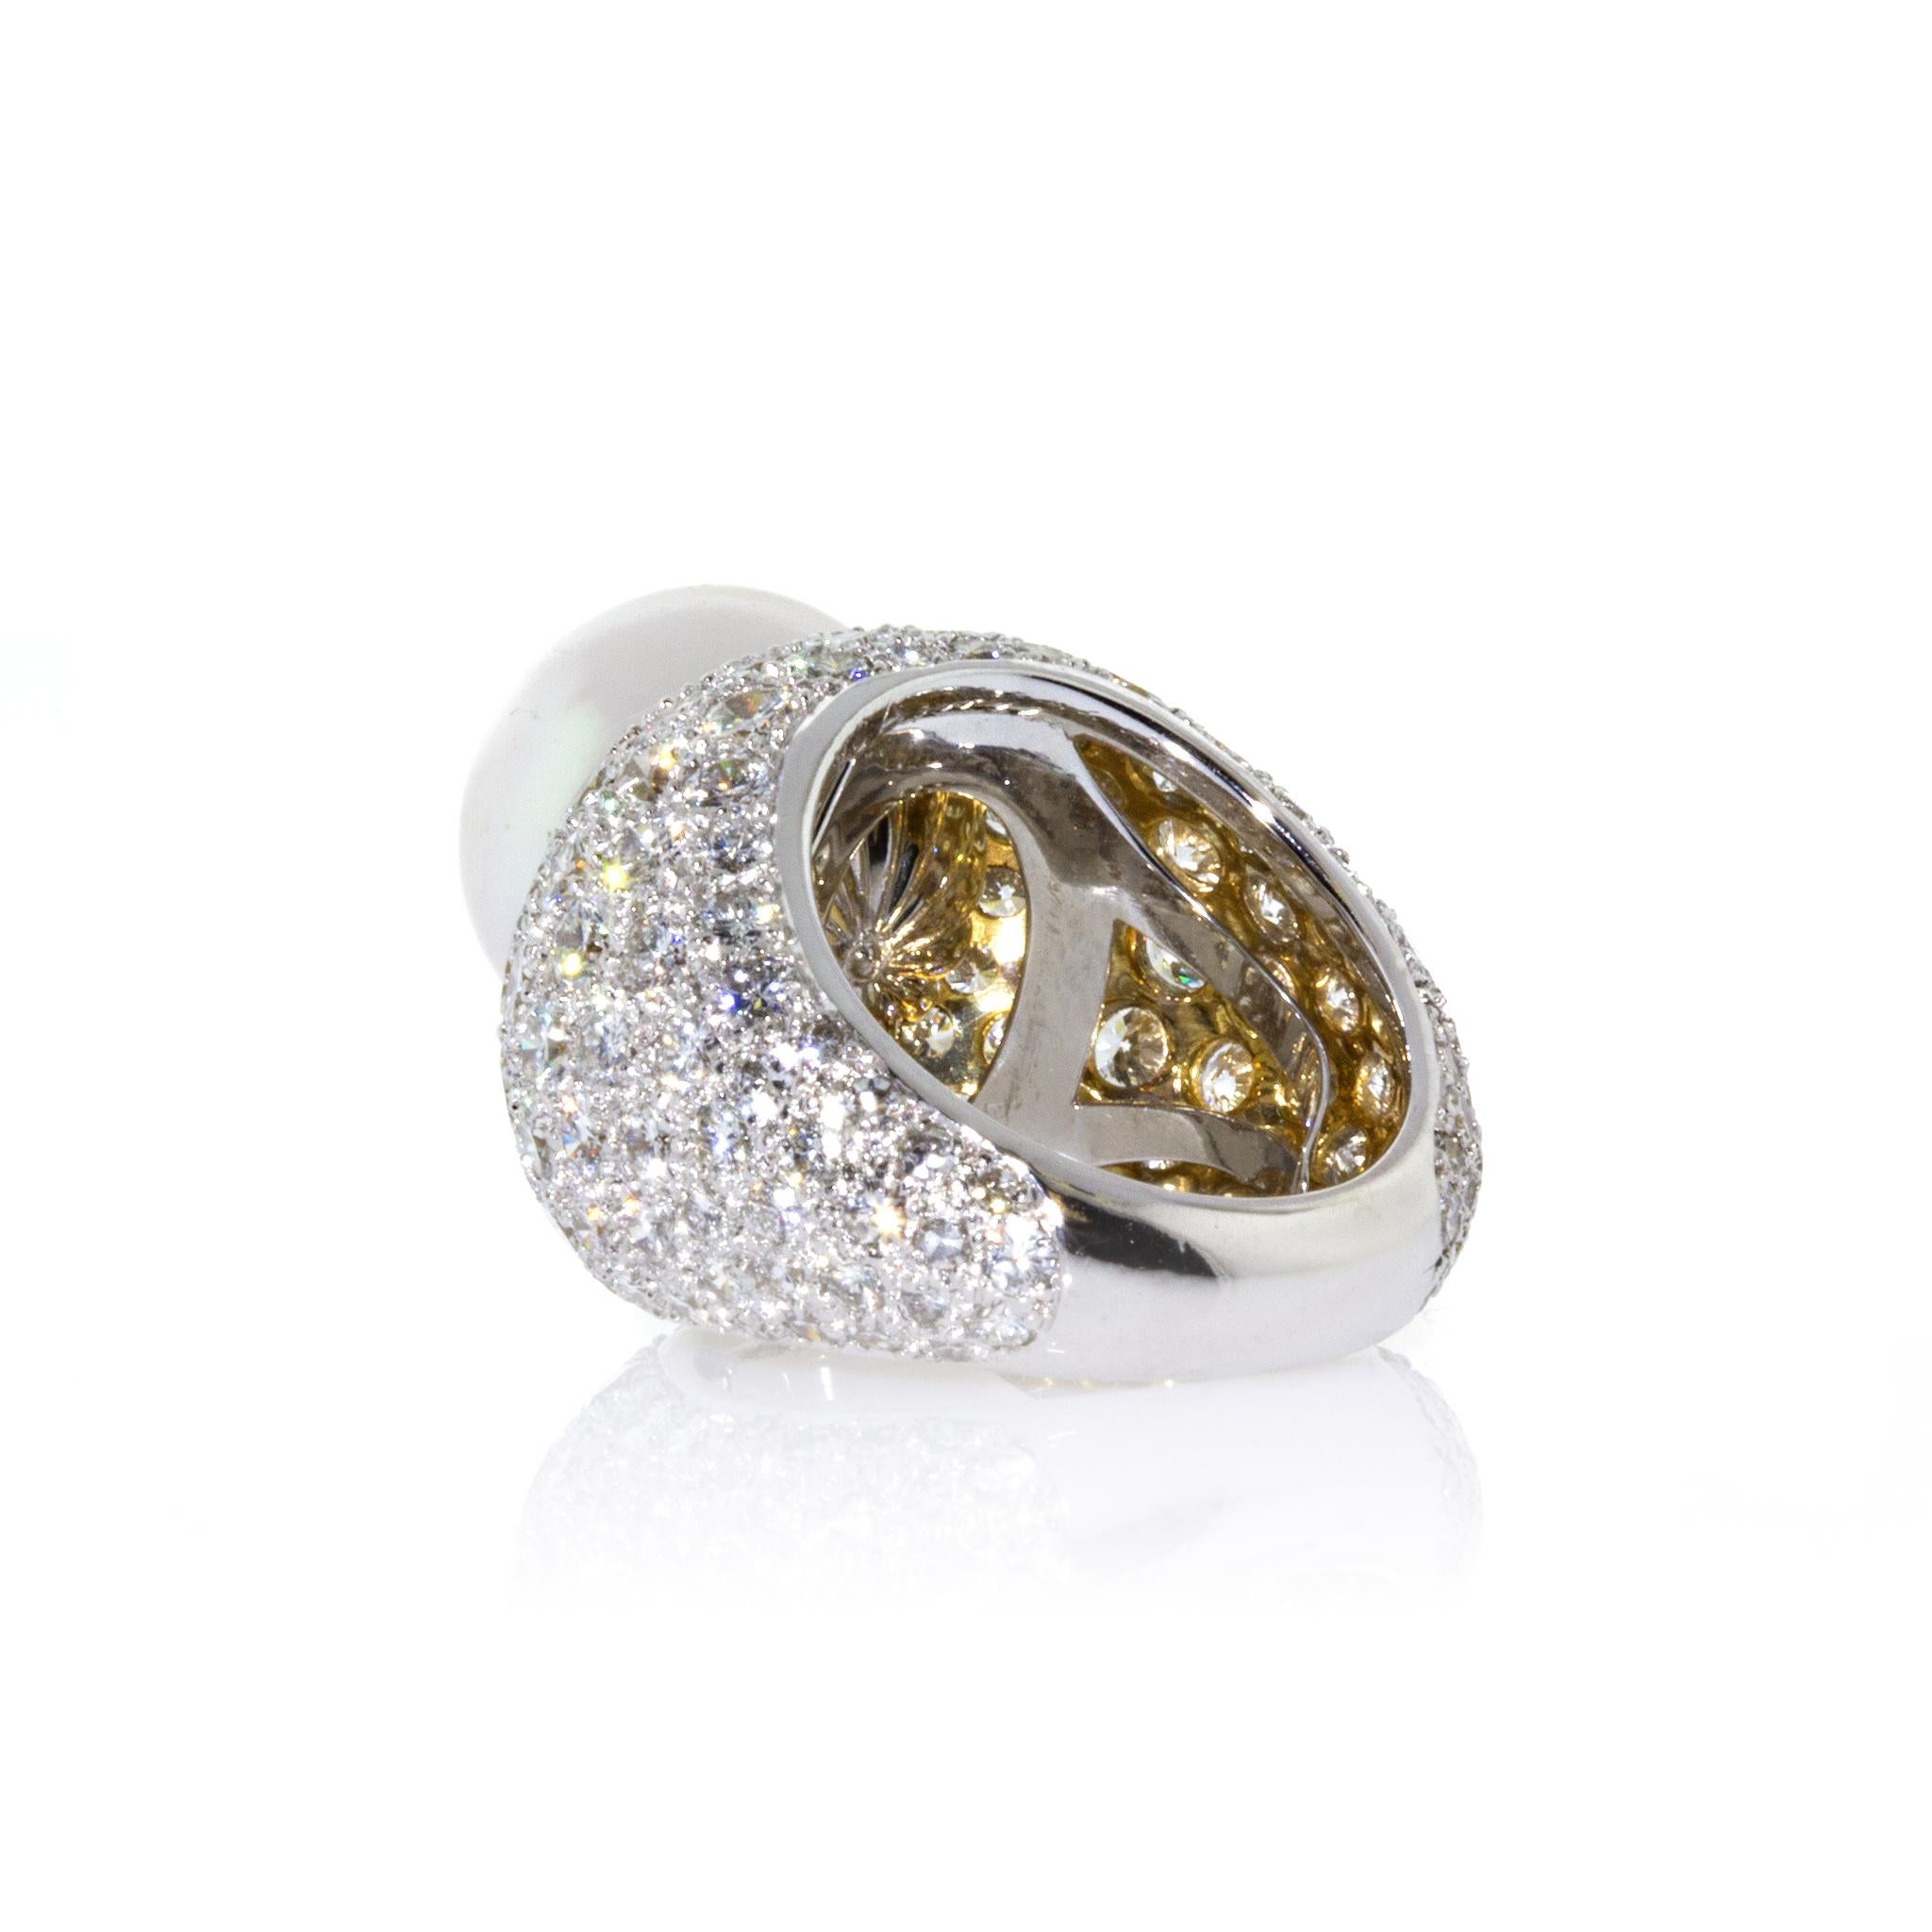 METAL TYPE: Platinum
STONE WEIGHT: 5.0ct twd (Diamond) / 14mm (South Sea Pearl)
RING SIZE: 6.5
TOTAL WEIGHT: 24.5 grams